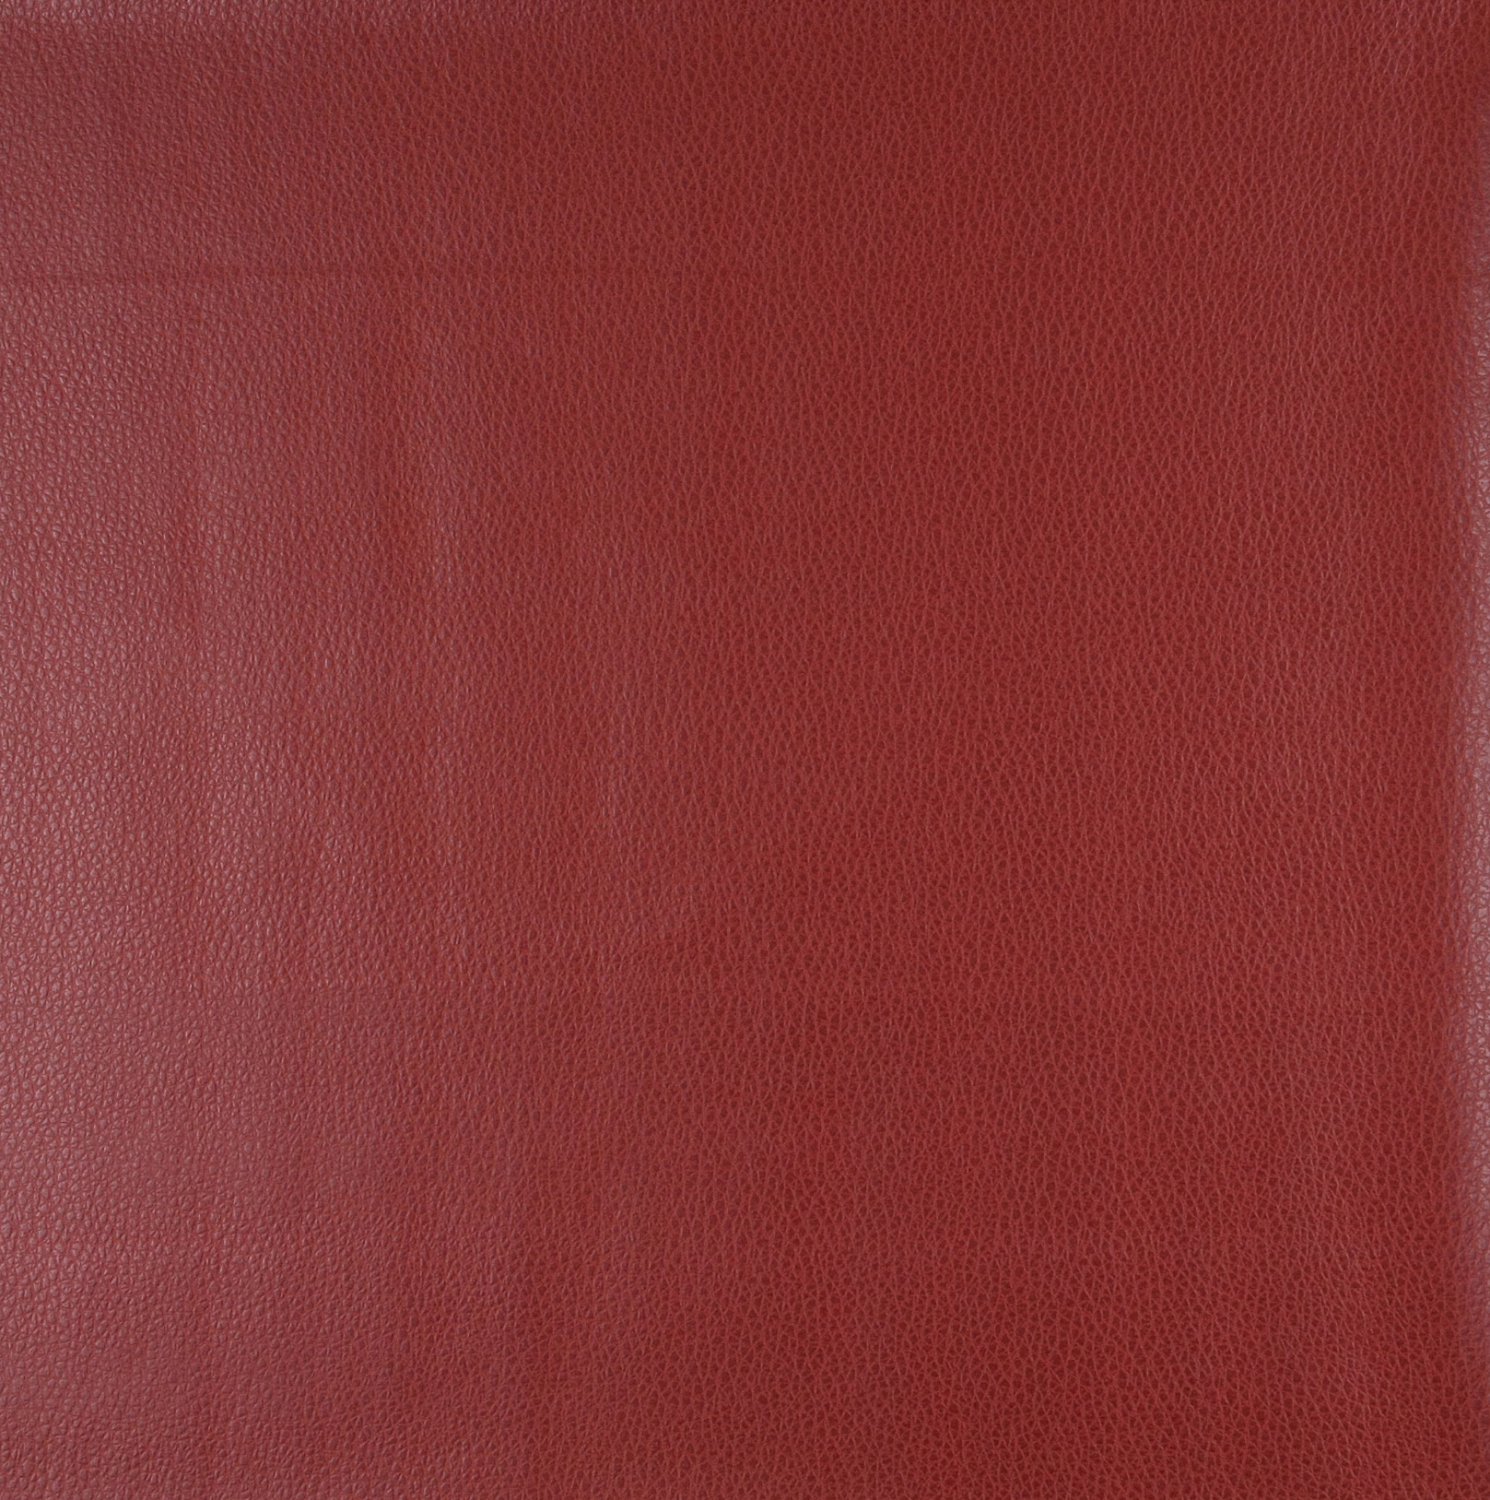 54"" Wide G219 Clove Red, Upholstery Faux Leather By The Yard